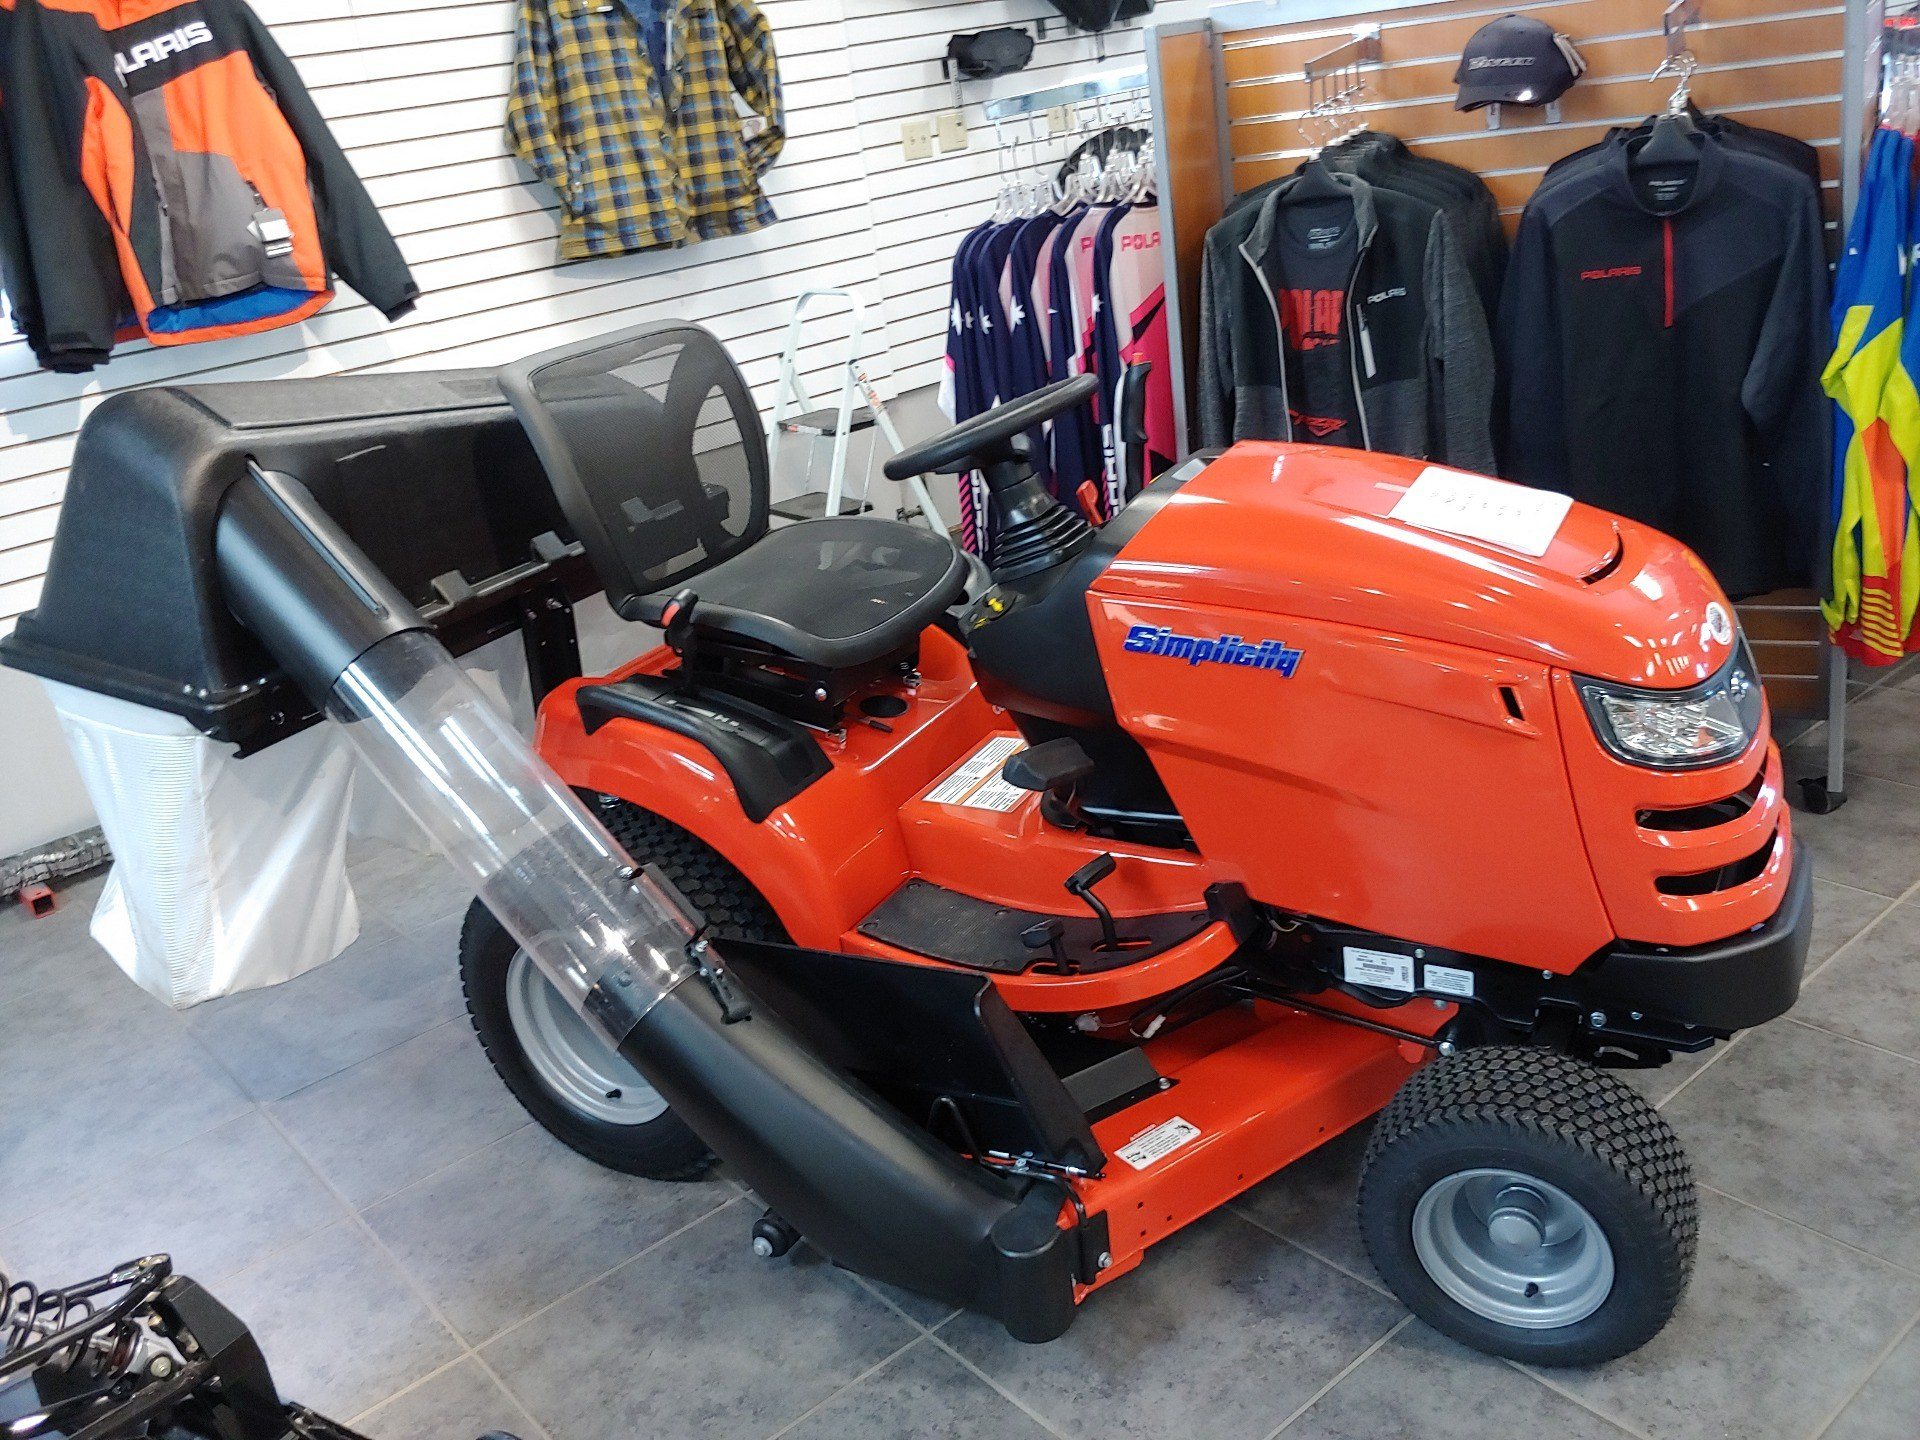 Why are Simplicity Mowers So Expensive? 